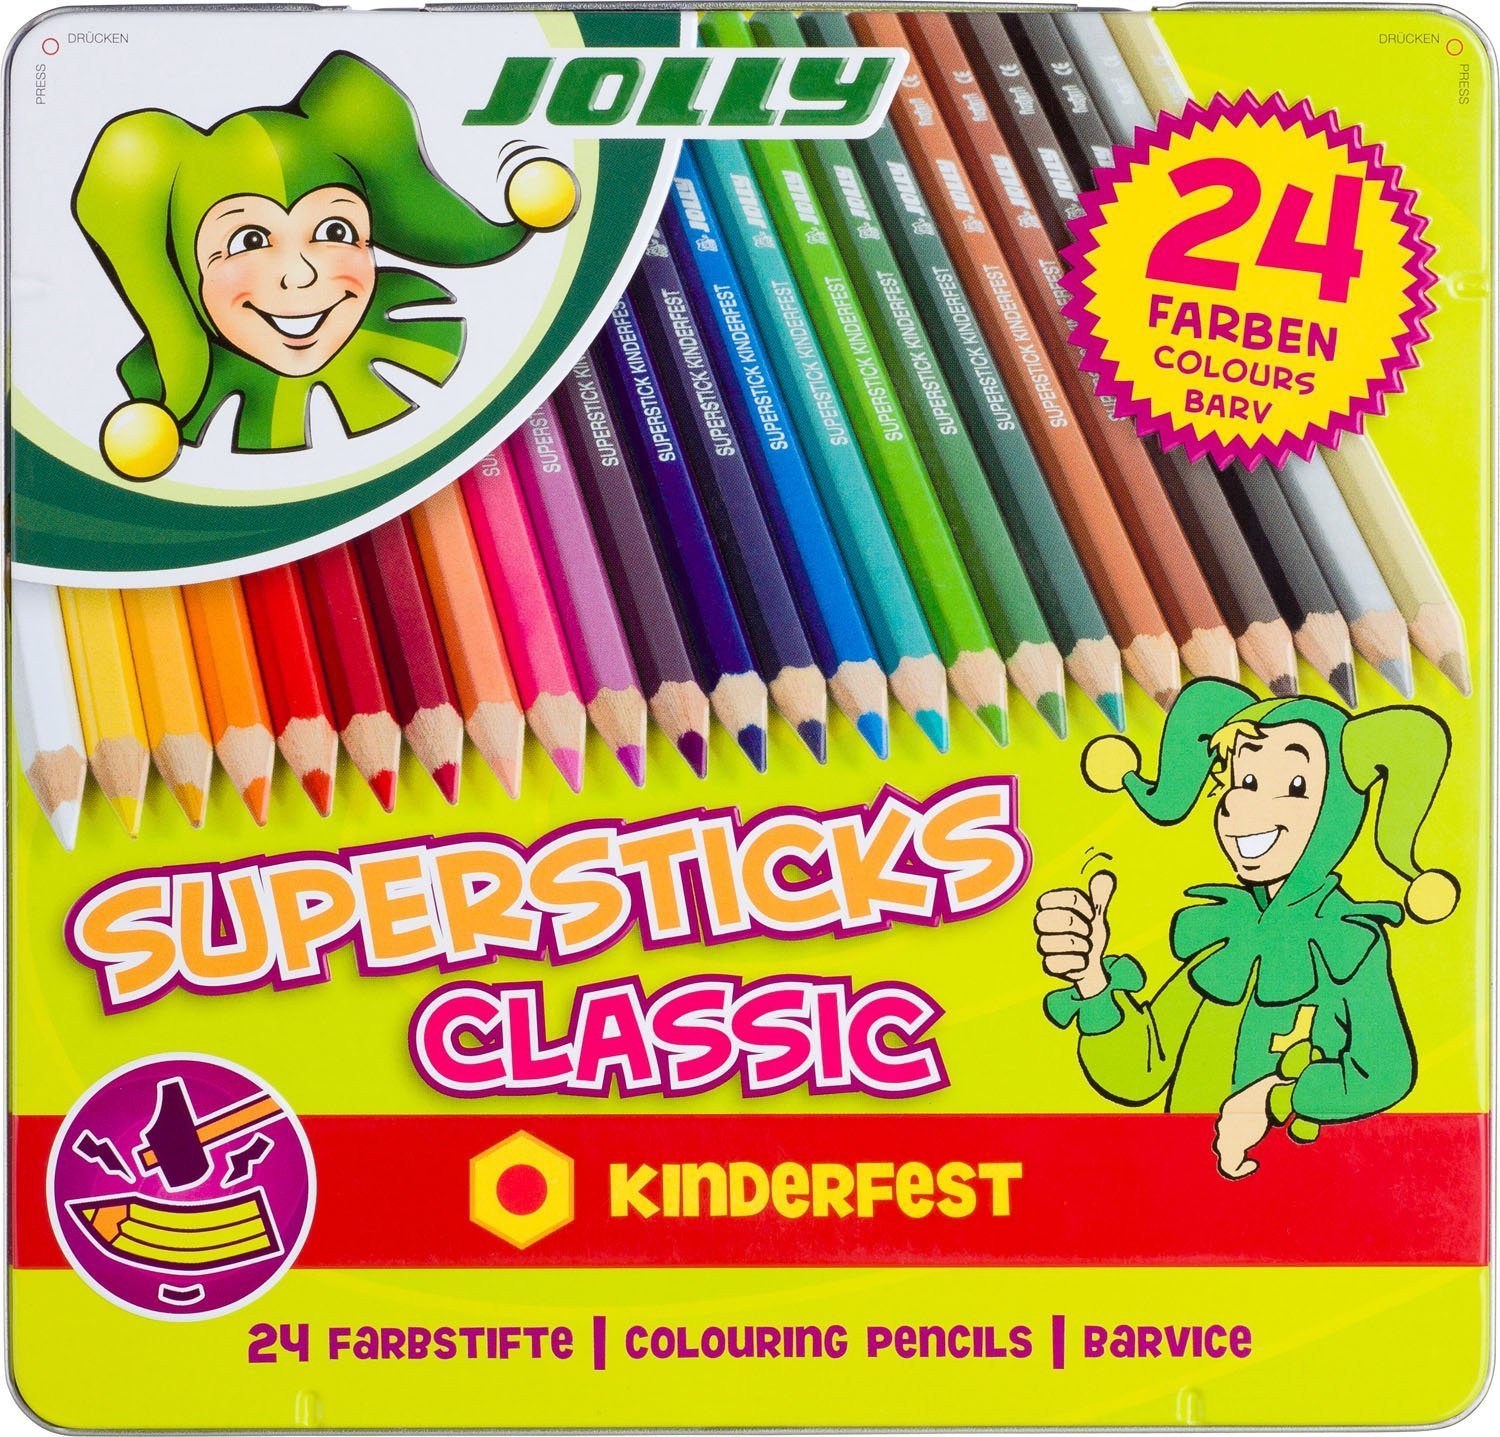 JOLLY Supersticks Premium European Colored Pencils with Tin Carrying Case; Set of 24, Arts and Crafts, Perfect for Adult and Kids Coloring